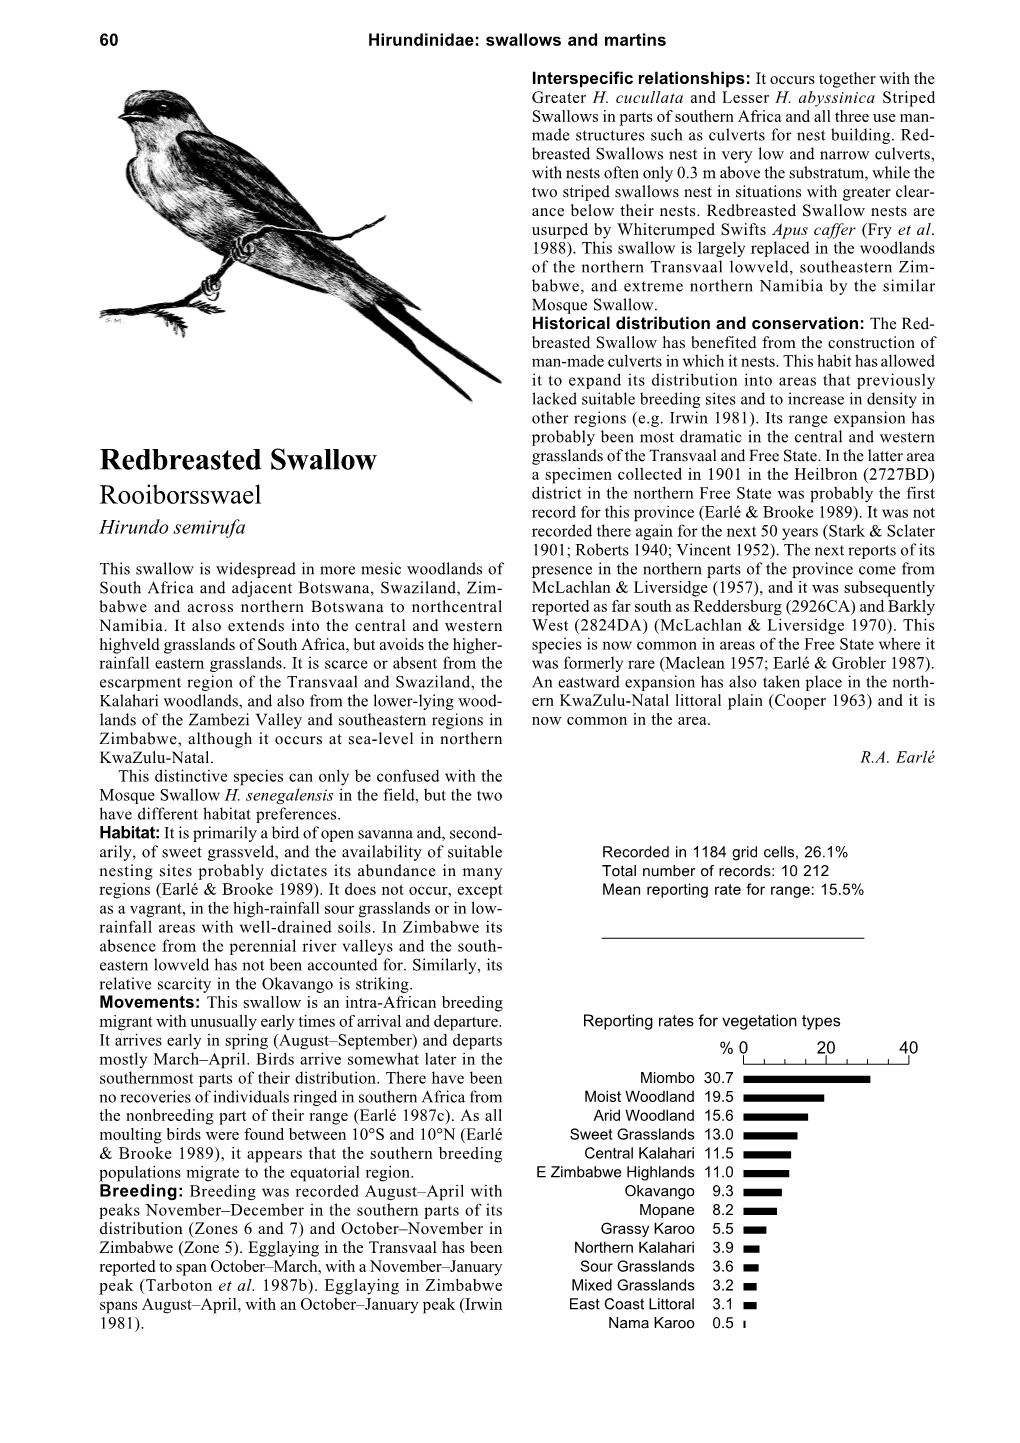 Redbreasted Swallow Nests Are Usurped by Whiterumped Swifts Apus Caffer (Fry Et Al